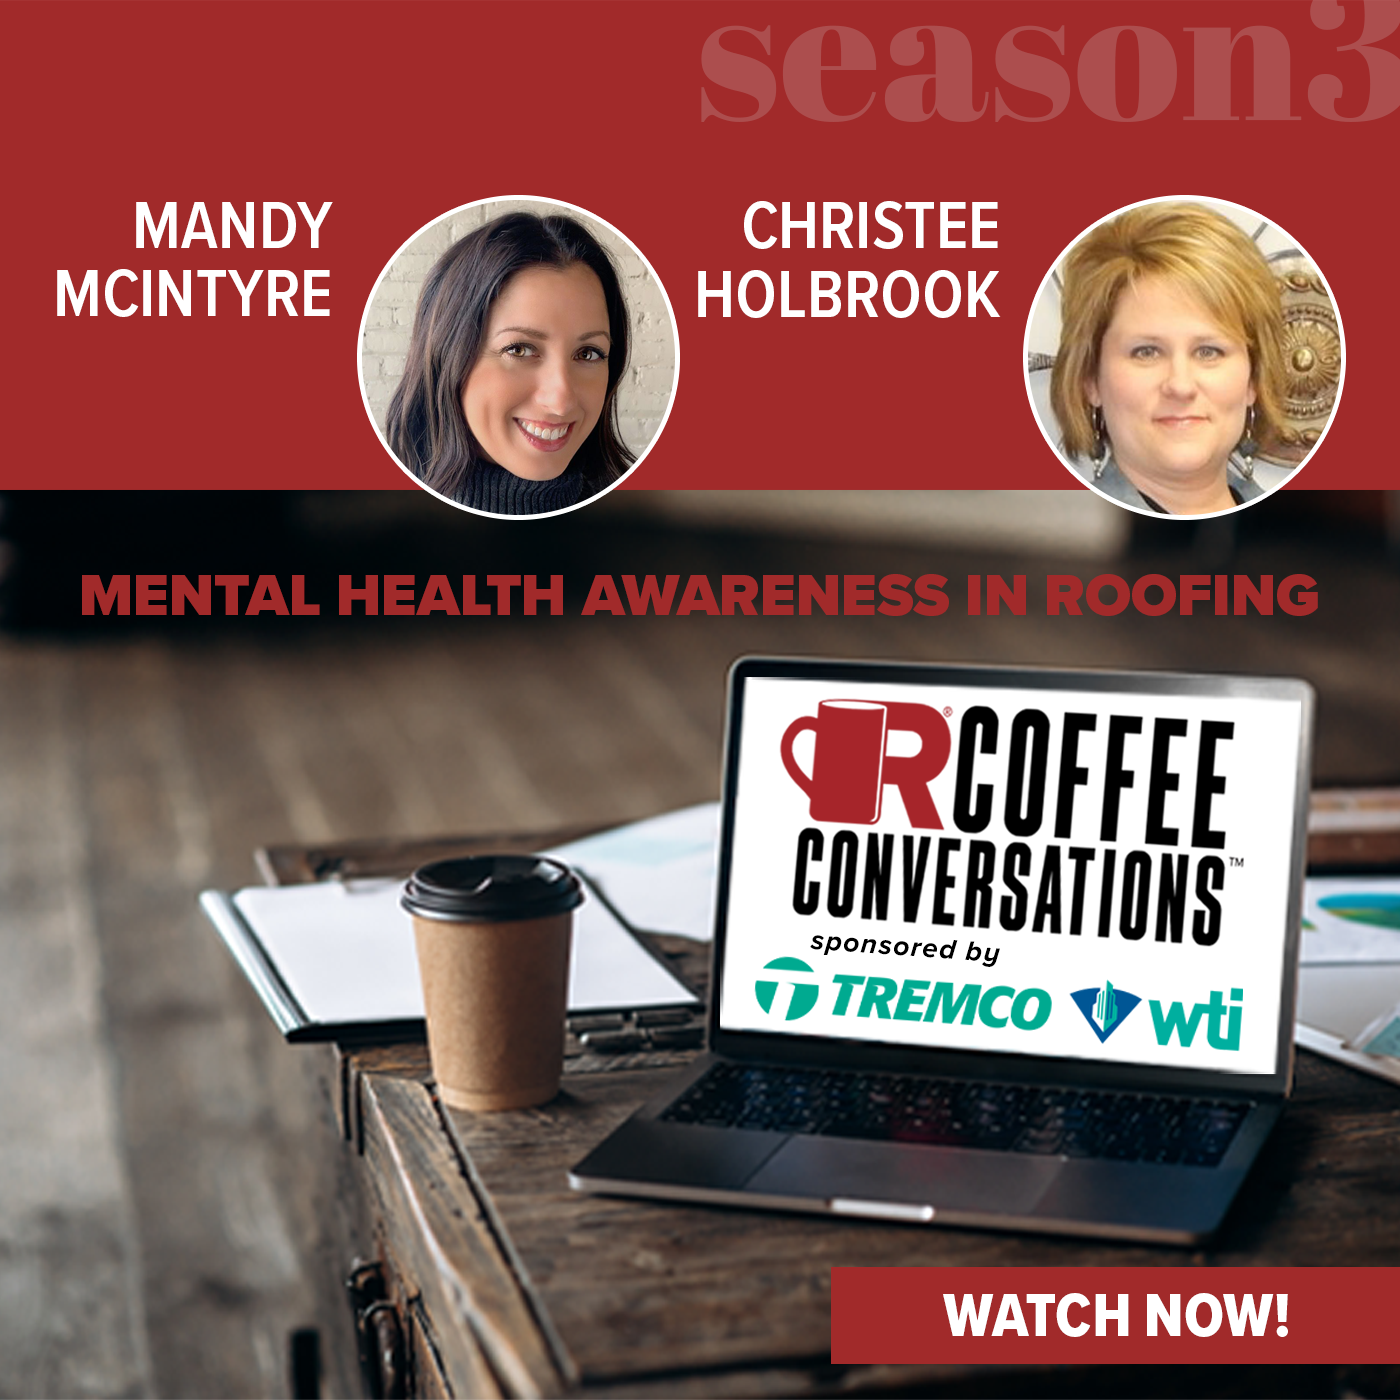 TremcoWTI - Coffee Conversations - The Importance of Mental Health Awareness in Roofing - Sponsored by Tremco & WTI - POD